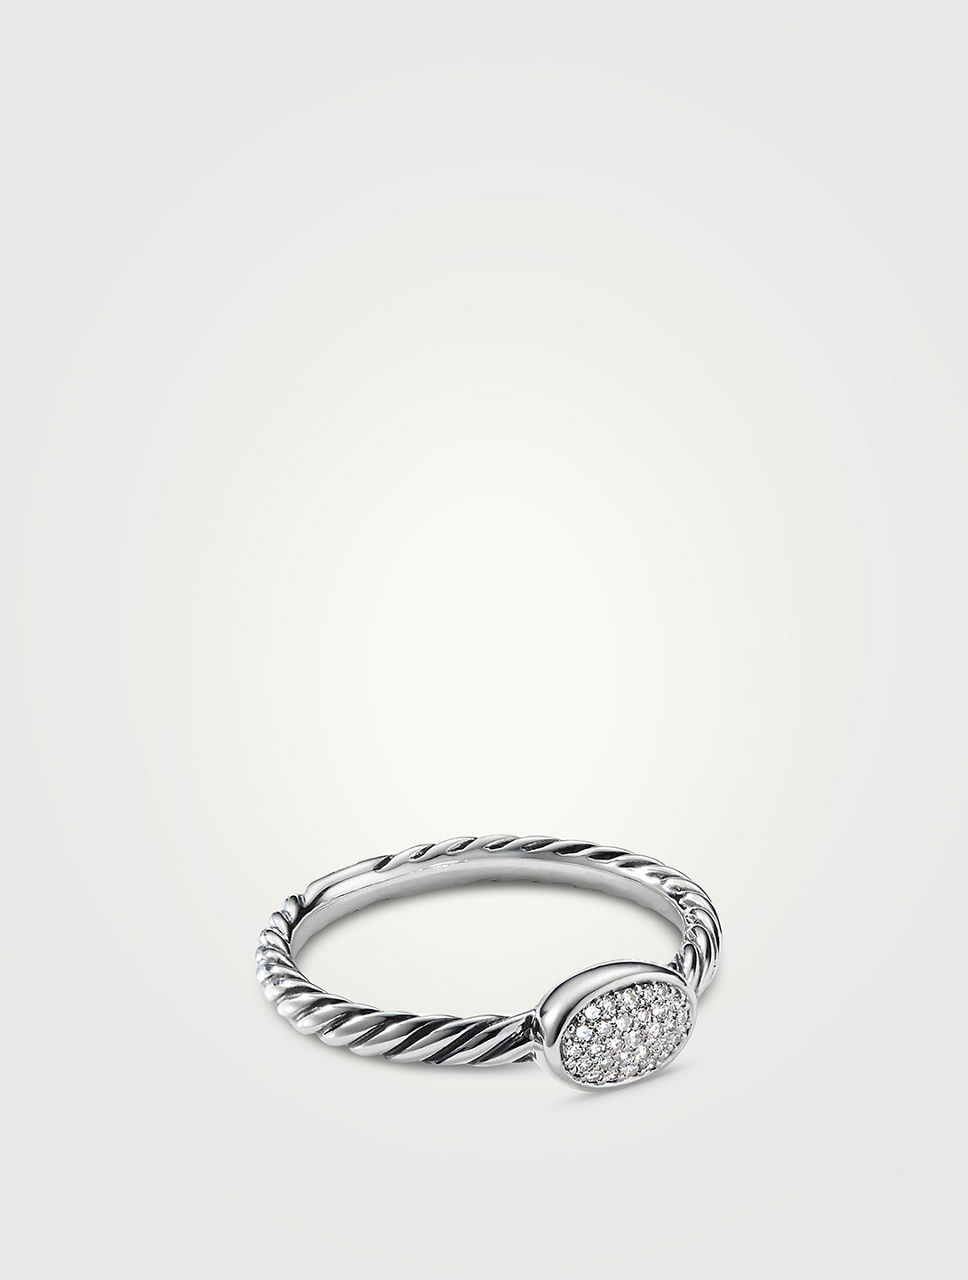 Cable Collectibles® Oval Stack Ring Sterling Silver With Pavé Diamonds